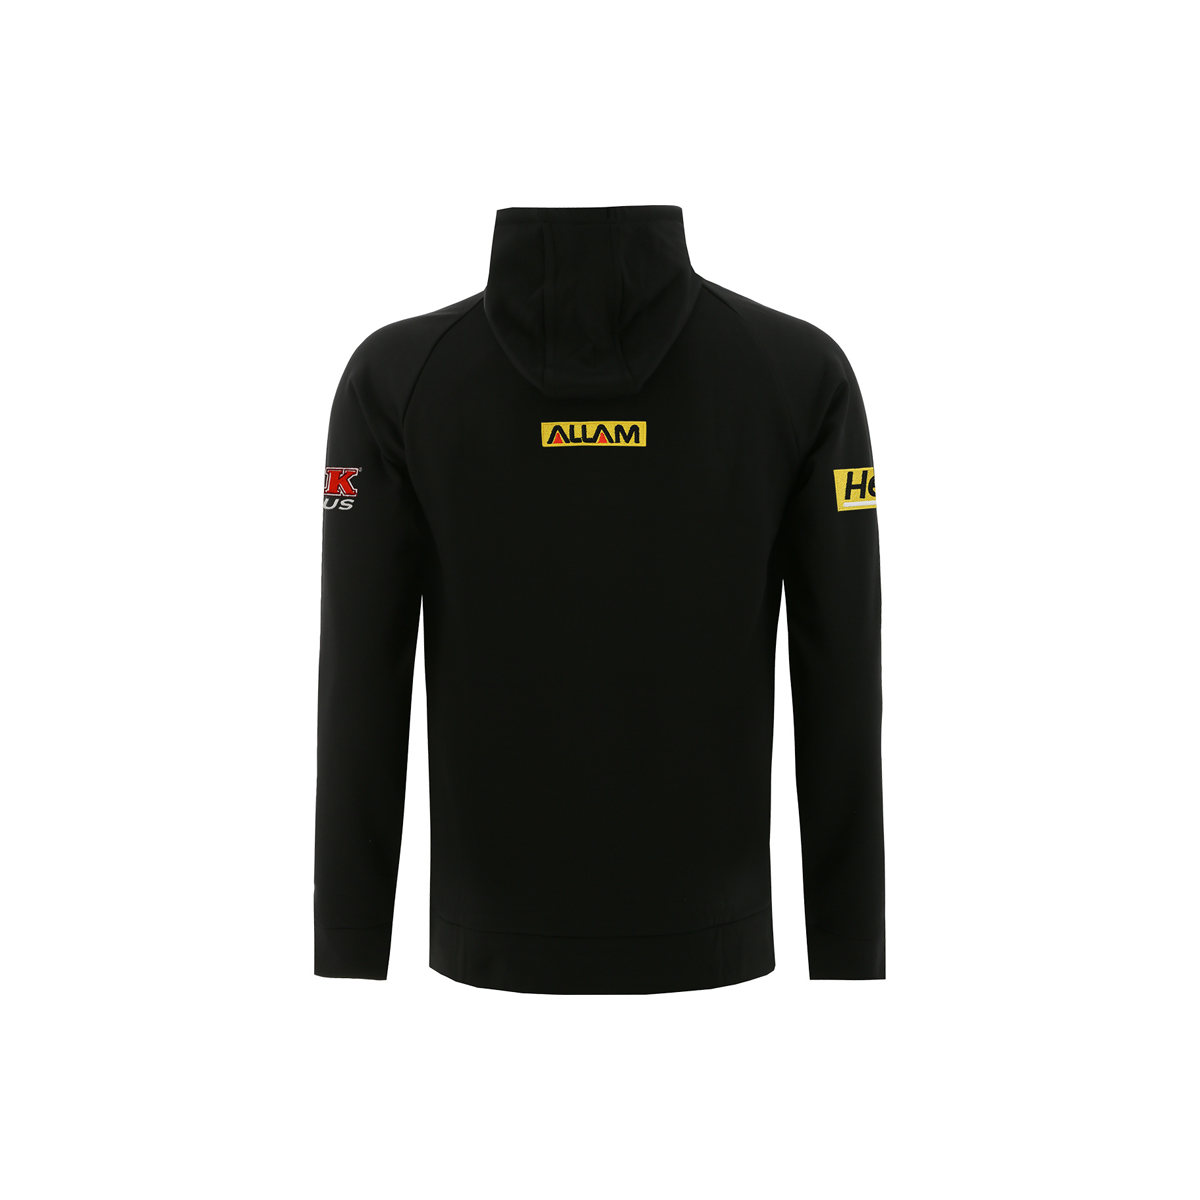 Penrith Panthers Youth OH Fleece Hoodie 23